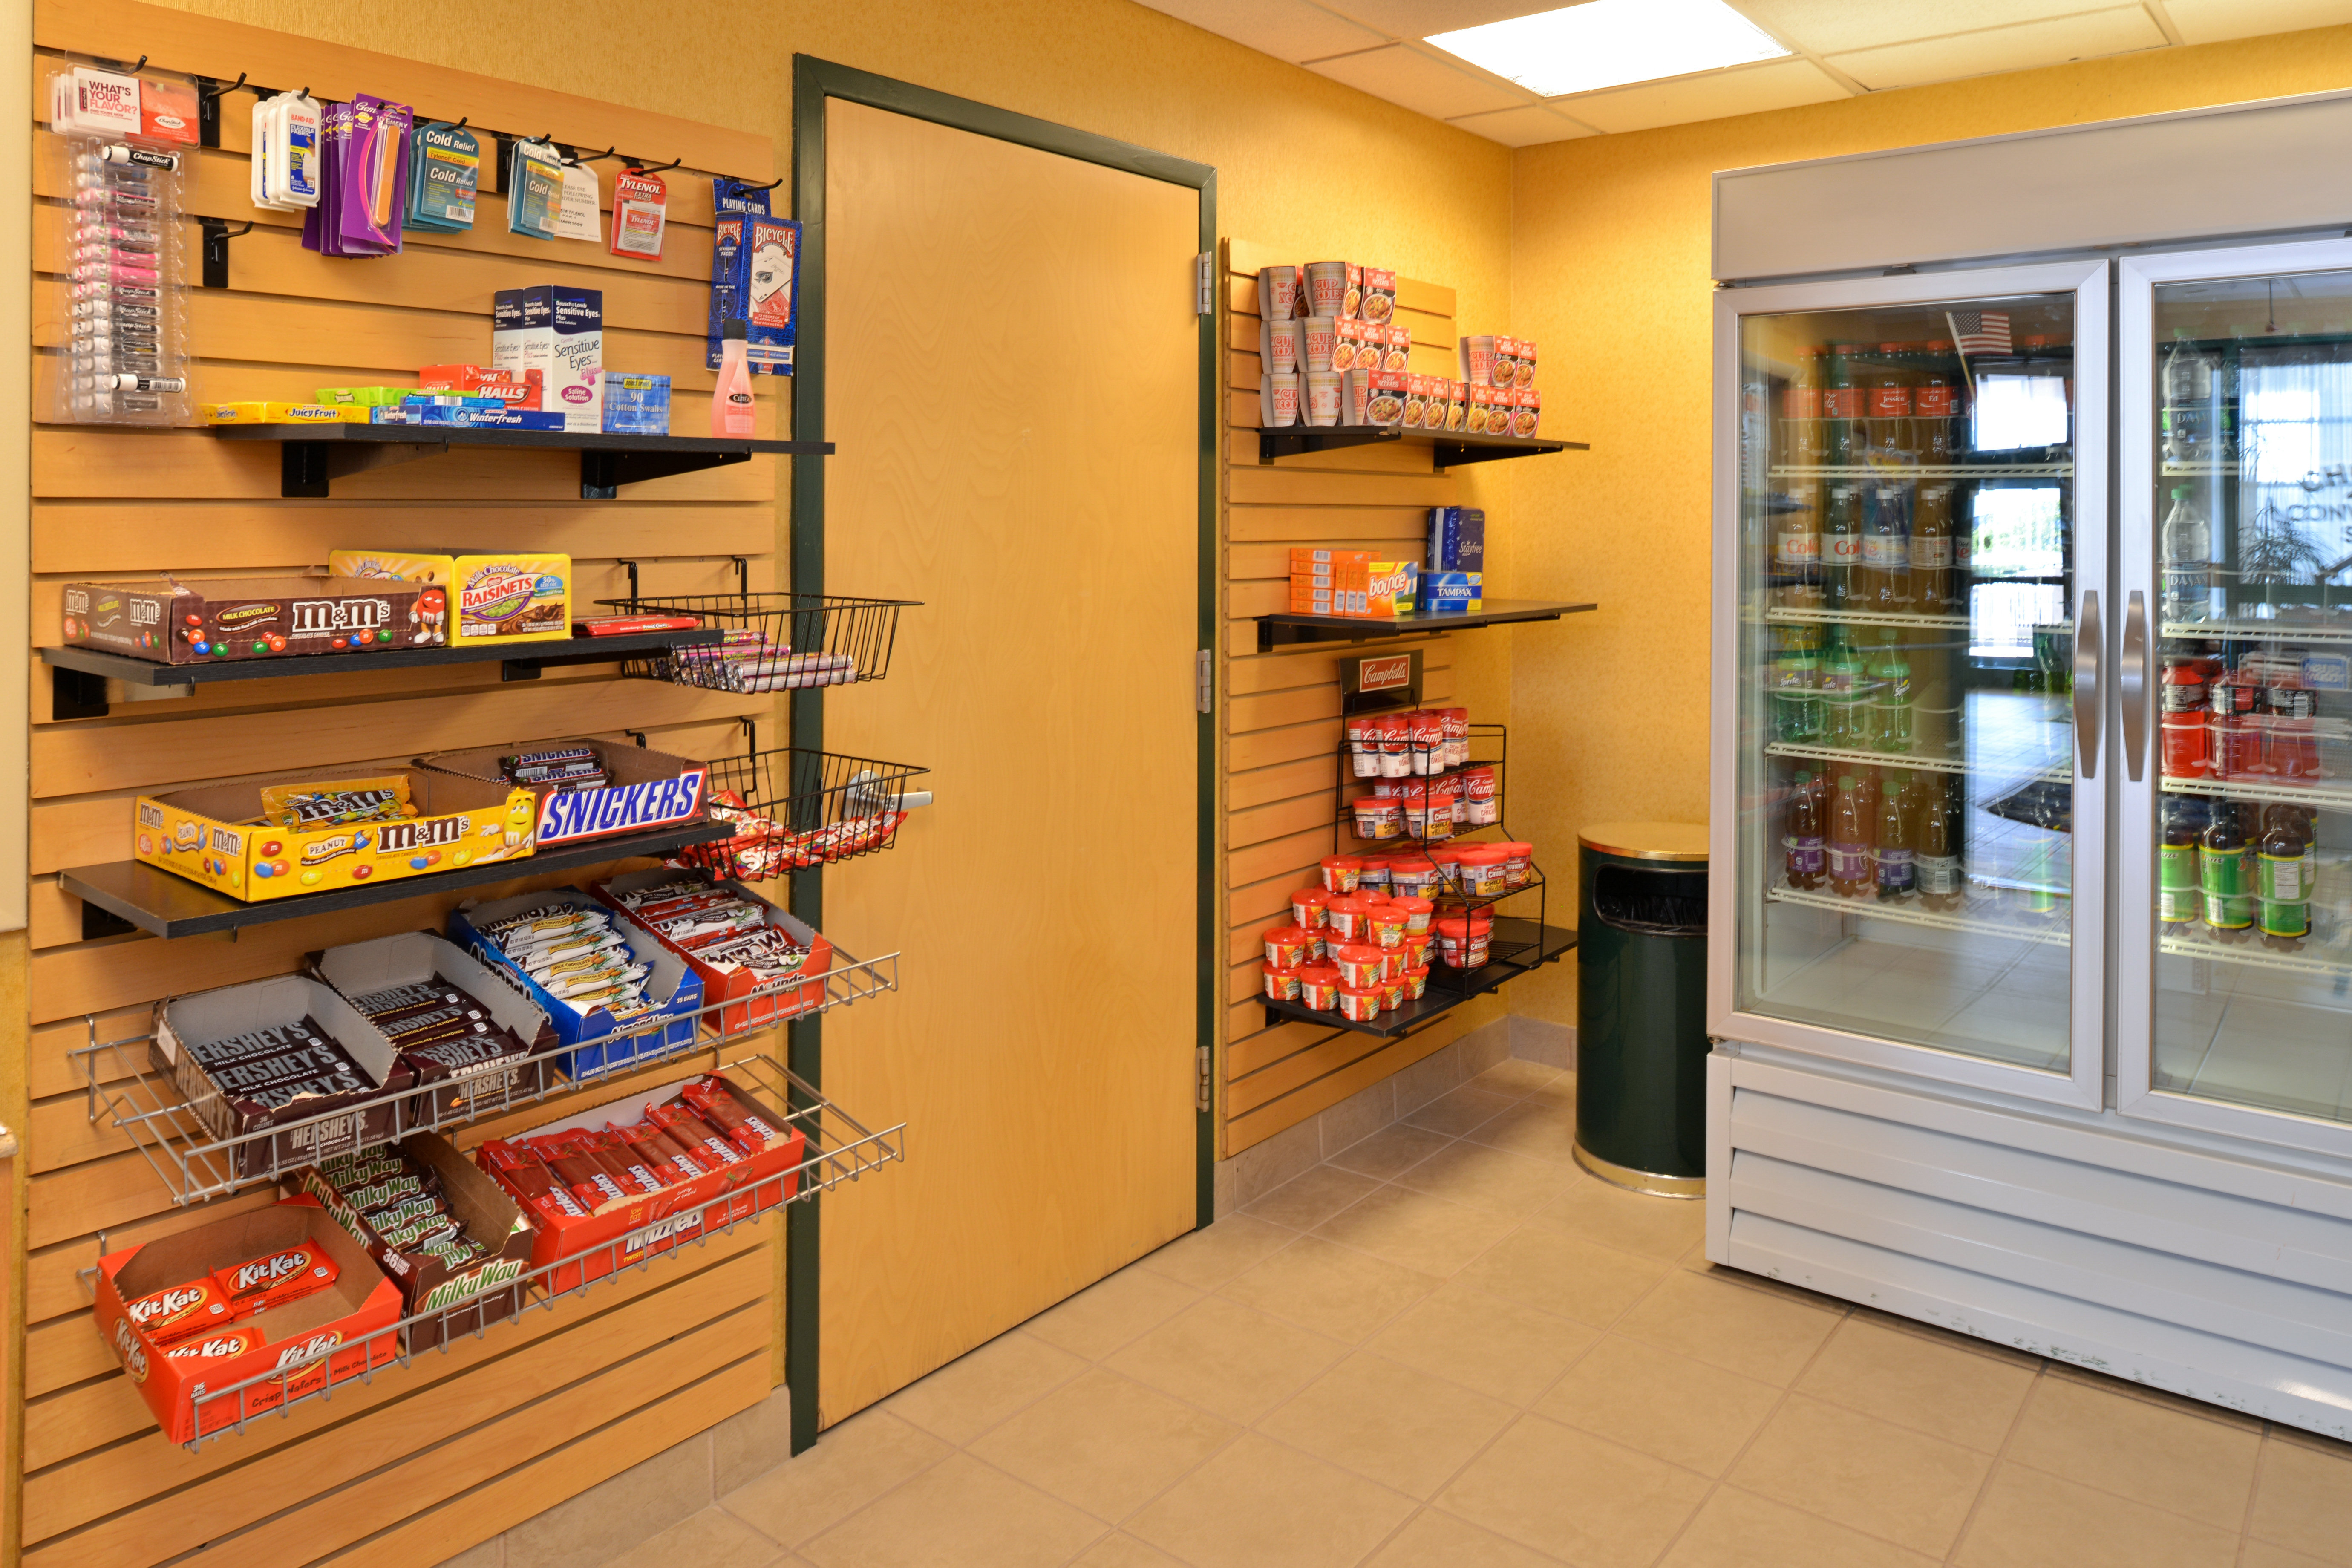 Choices convenience store is open 24 hours w/ a variety of snacks